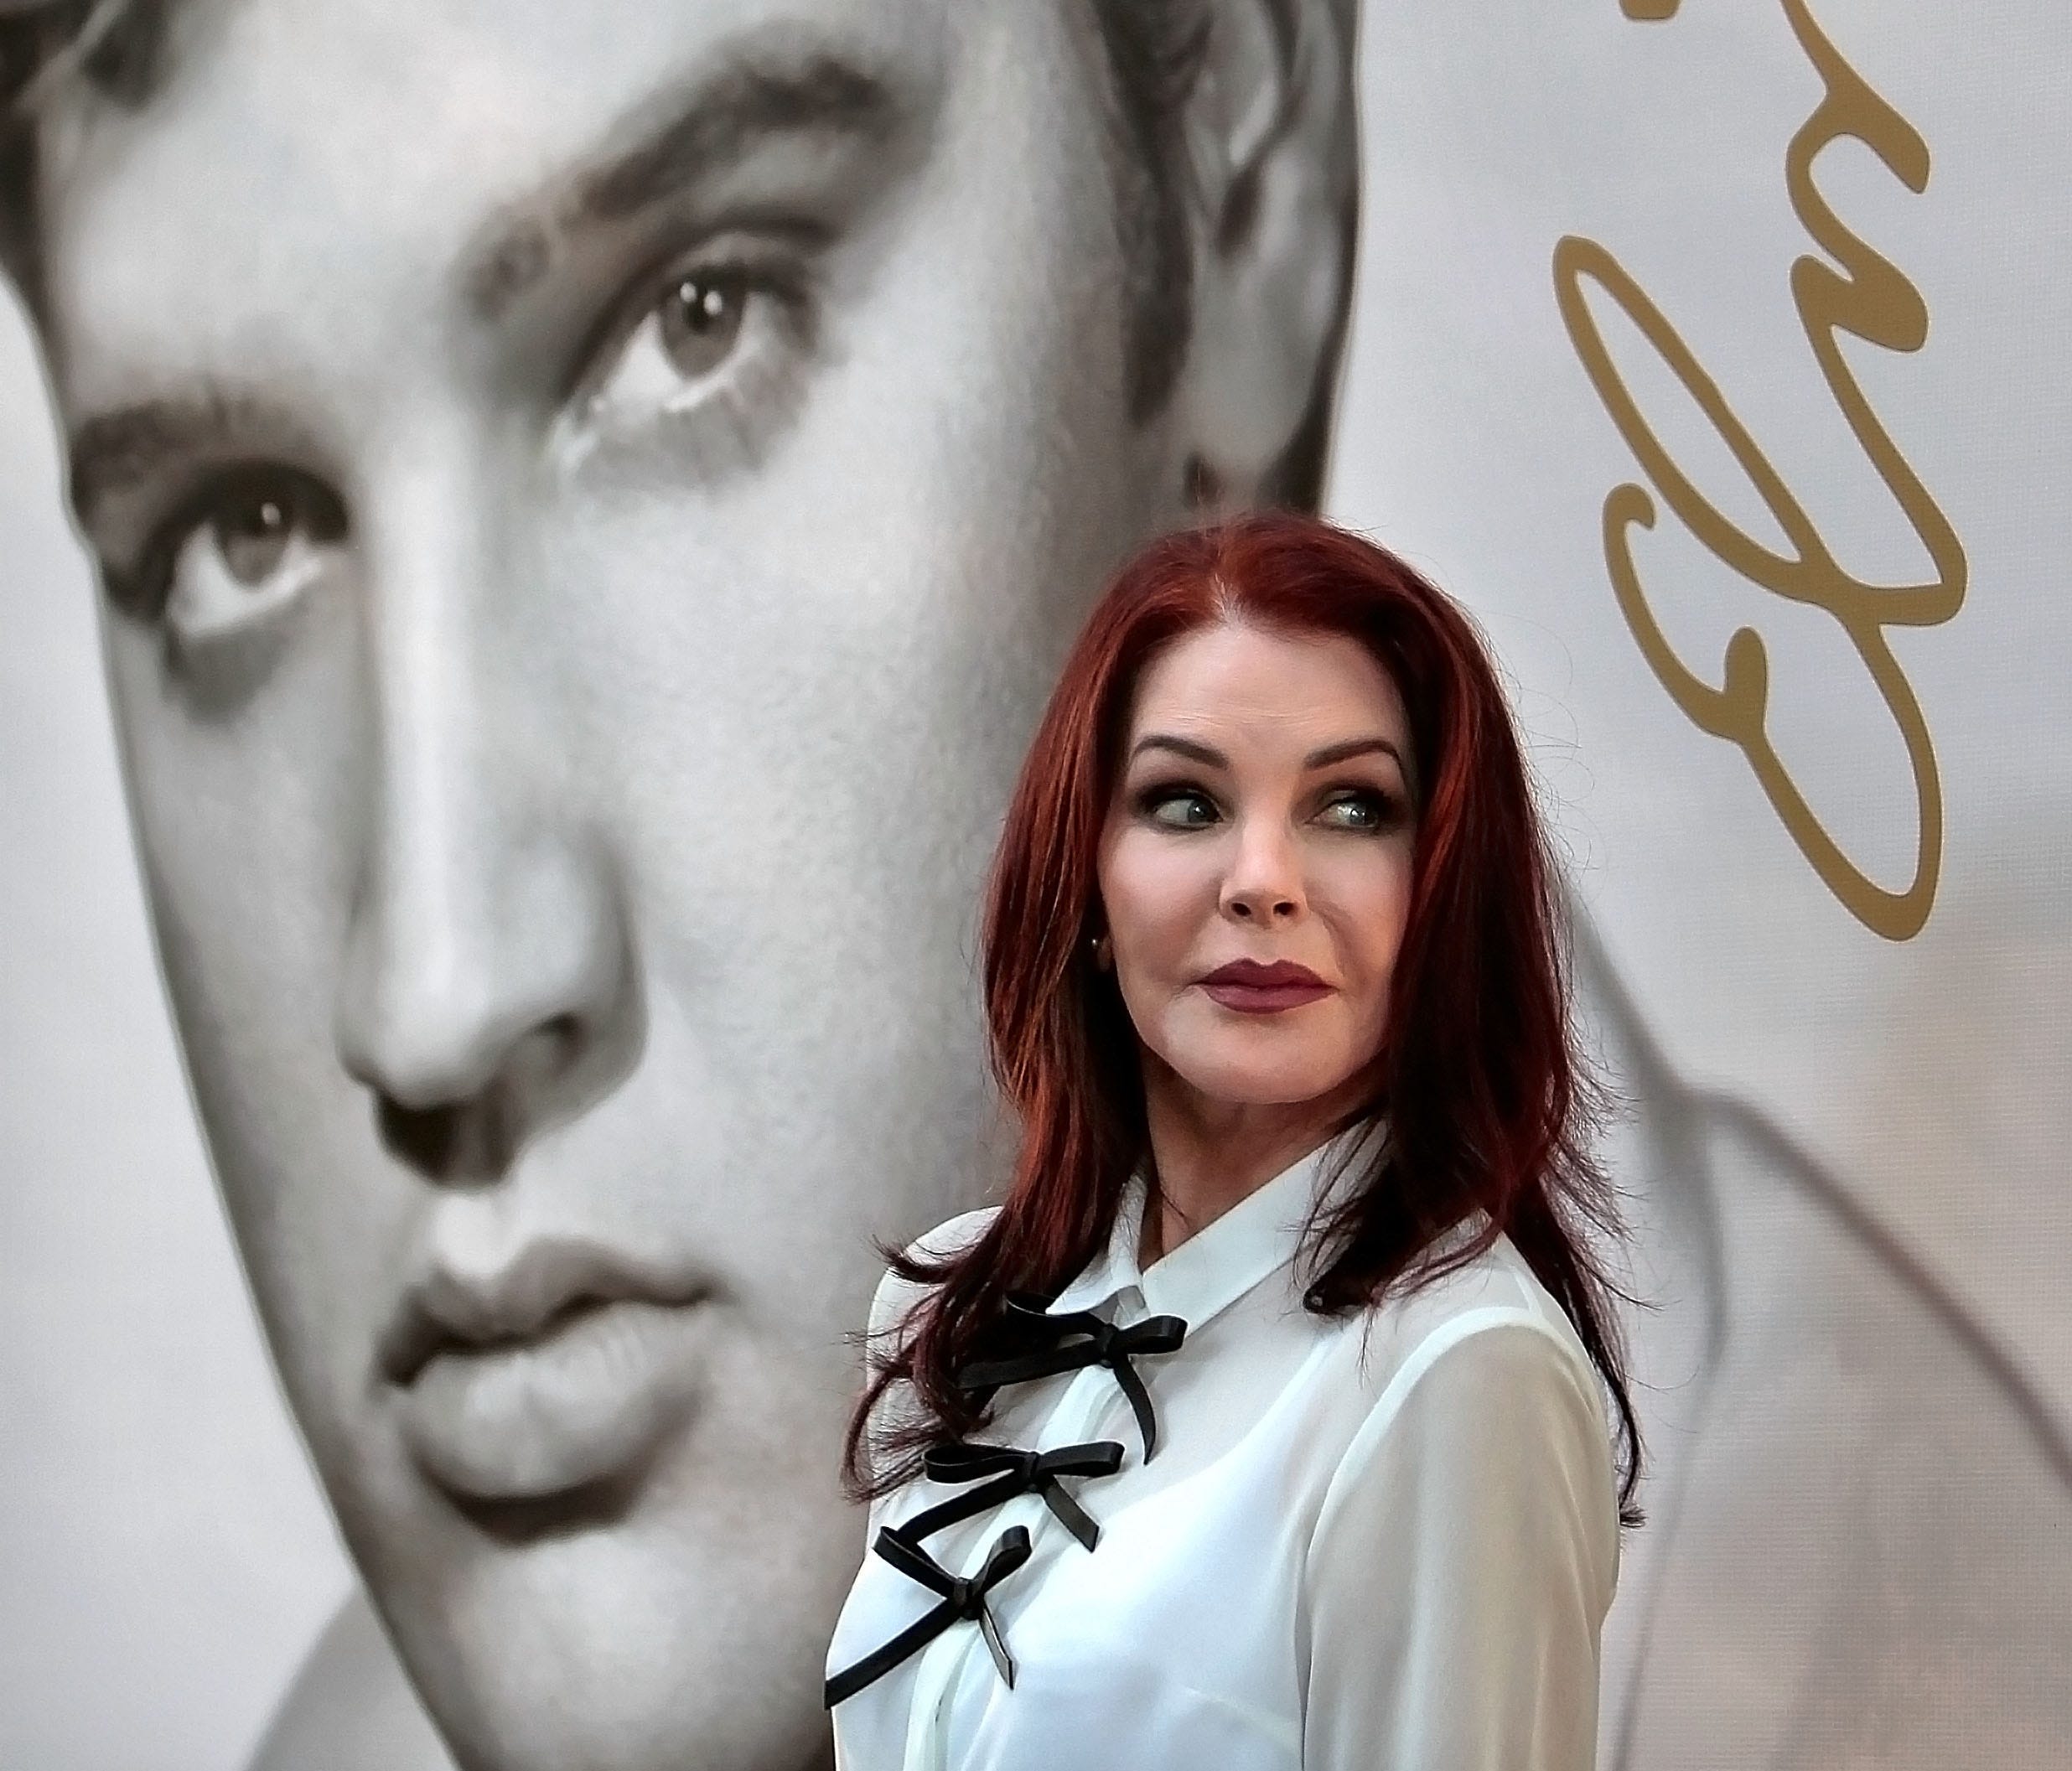 Priscilla Presley glances at a crowd of fans after the dedication ceremony for the new Elvis Forever stamp, the second postal stamp for the music icon Wednesday, Aug. 12, 2015, in Memphis.